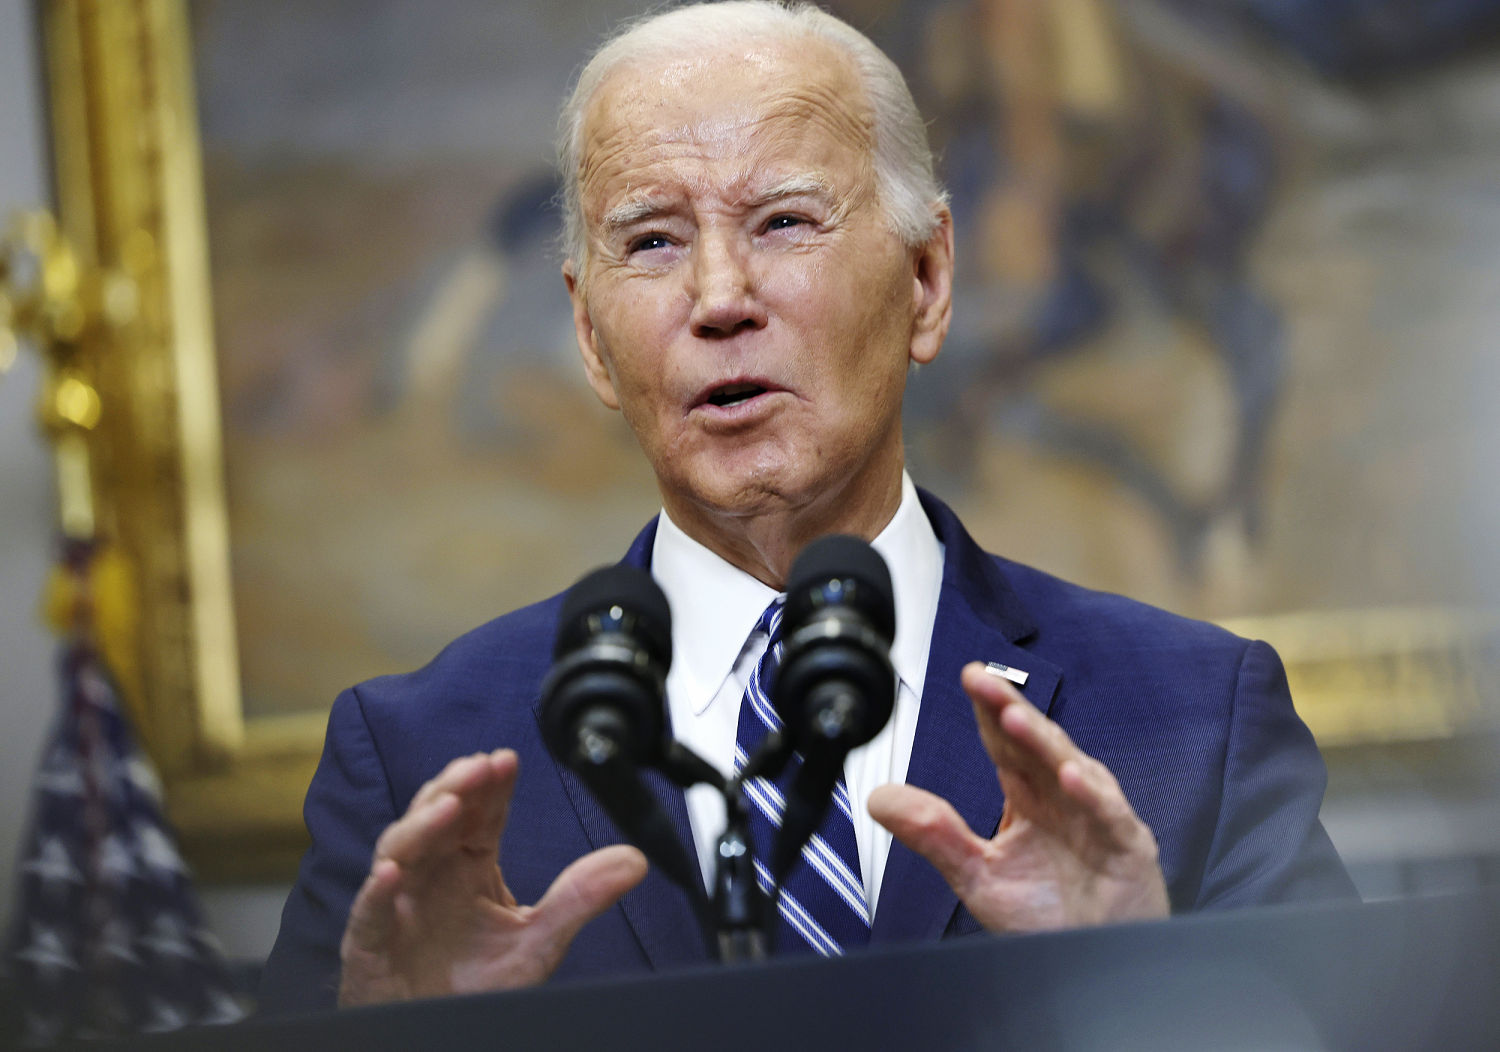 Biden says 'no nuclear threat' to U.S. as Russia considers potential space weapon 